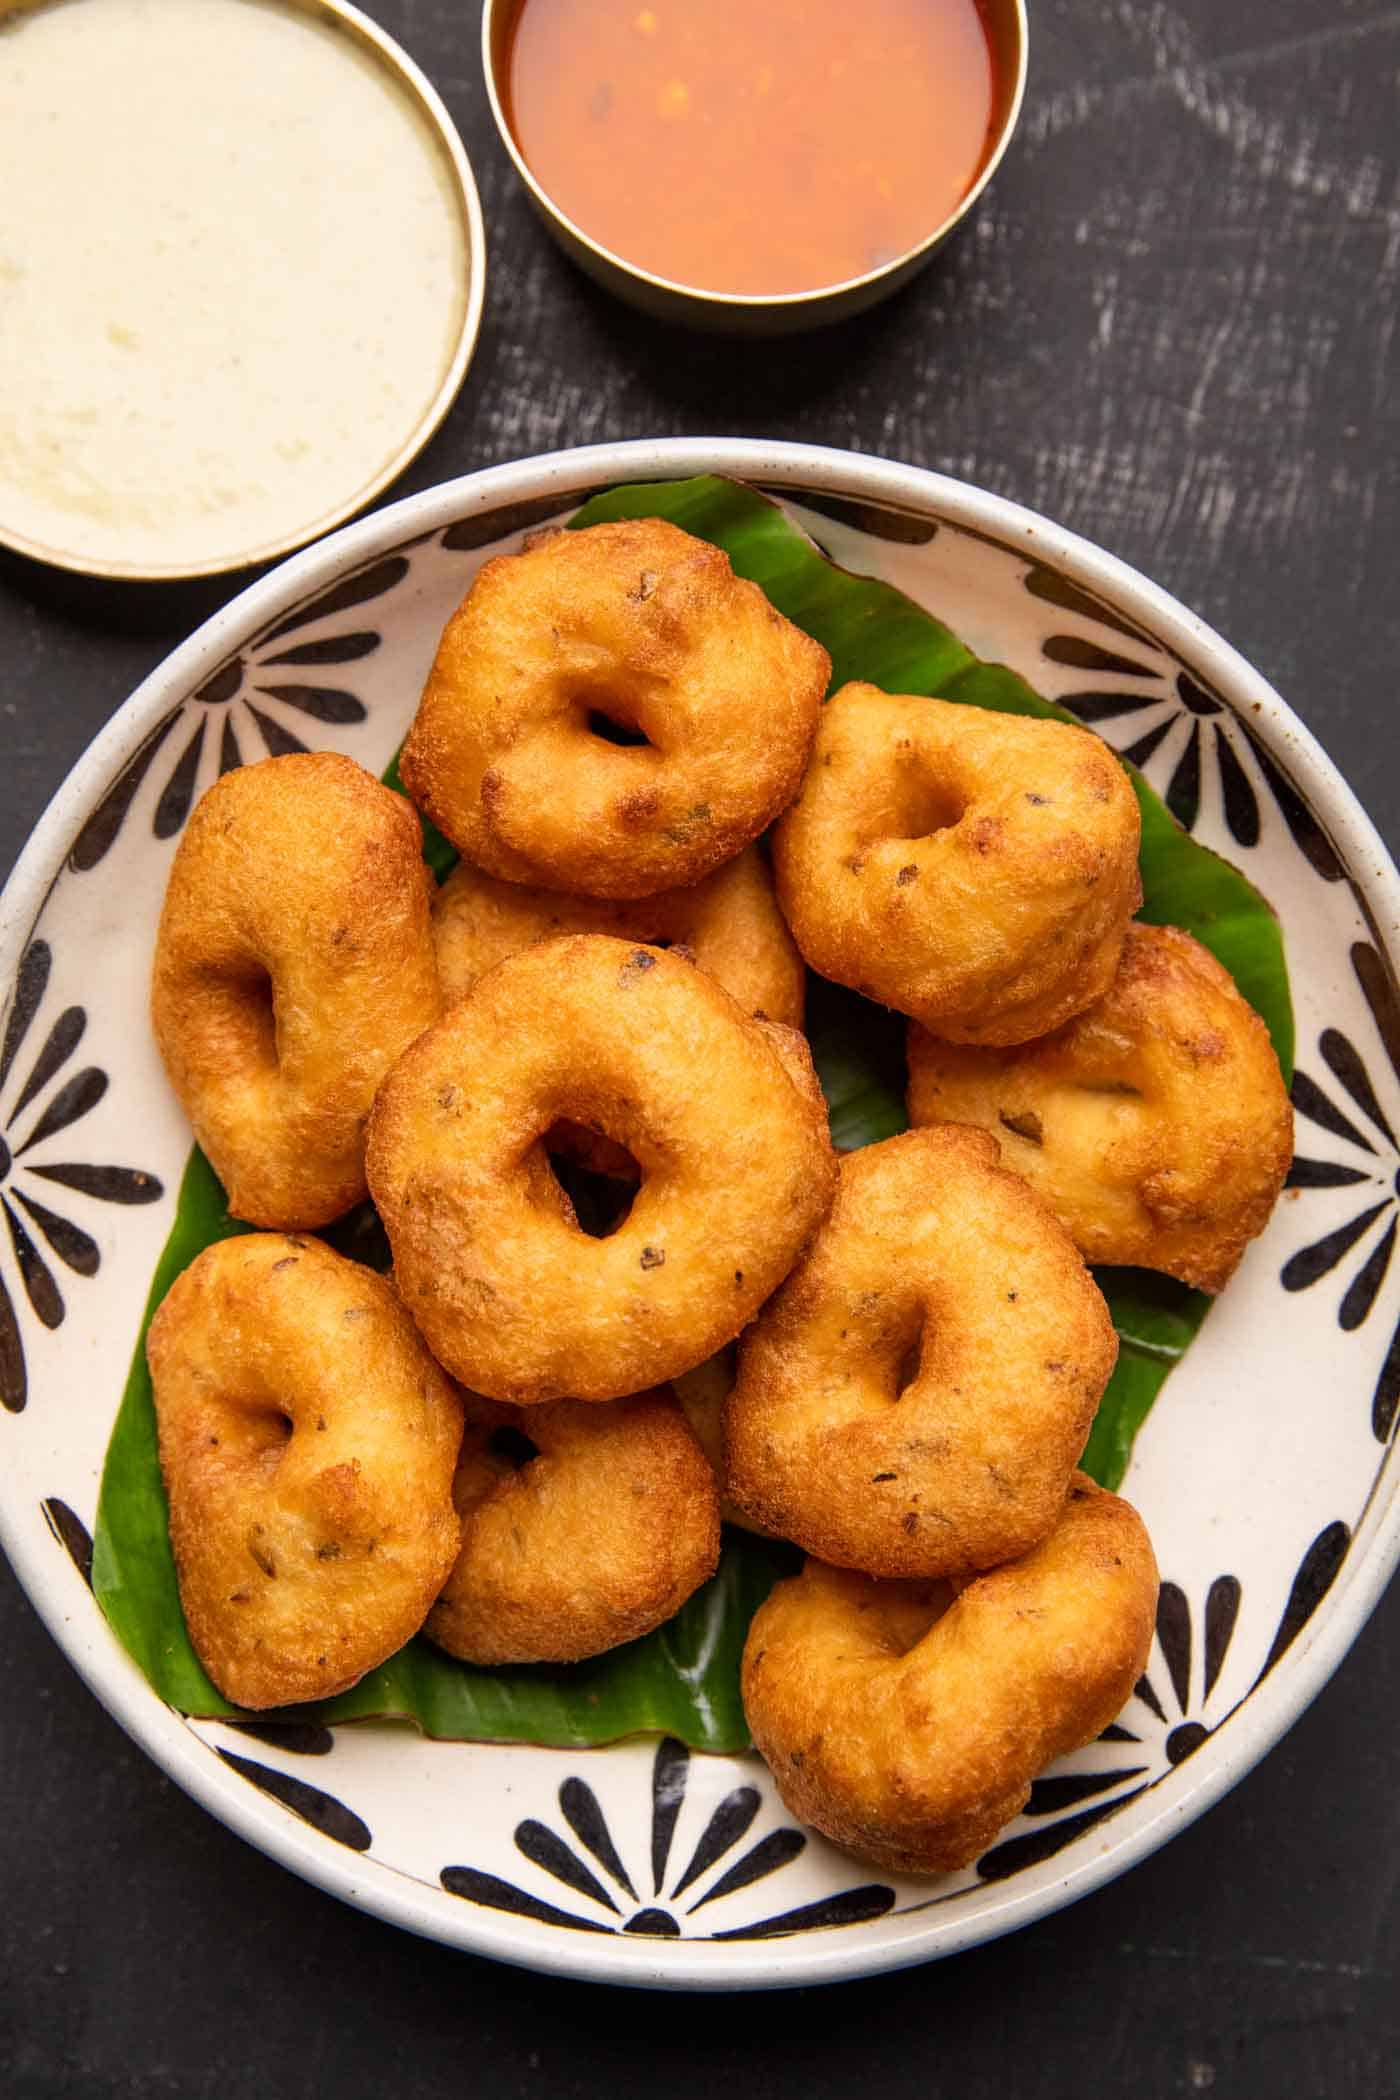 Medu vada served over a banana leaf in a bowl with chutney and sambar on the side